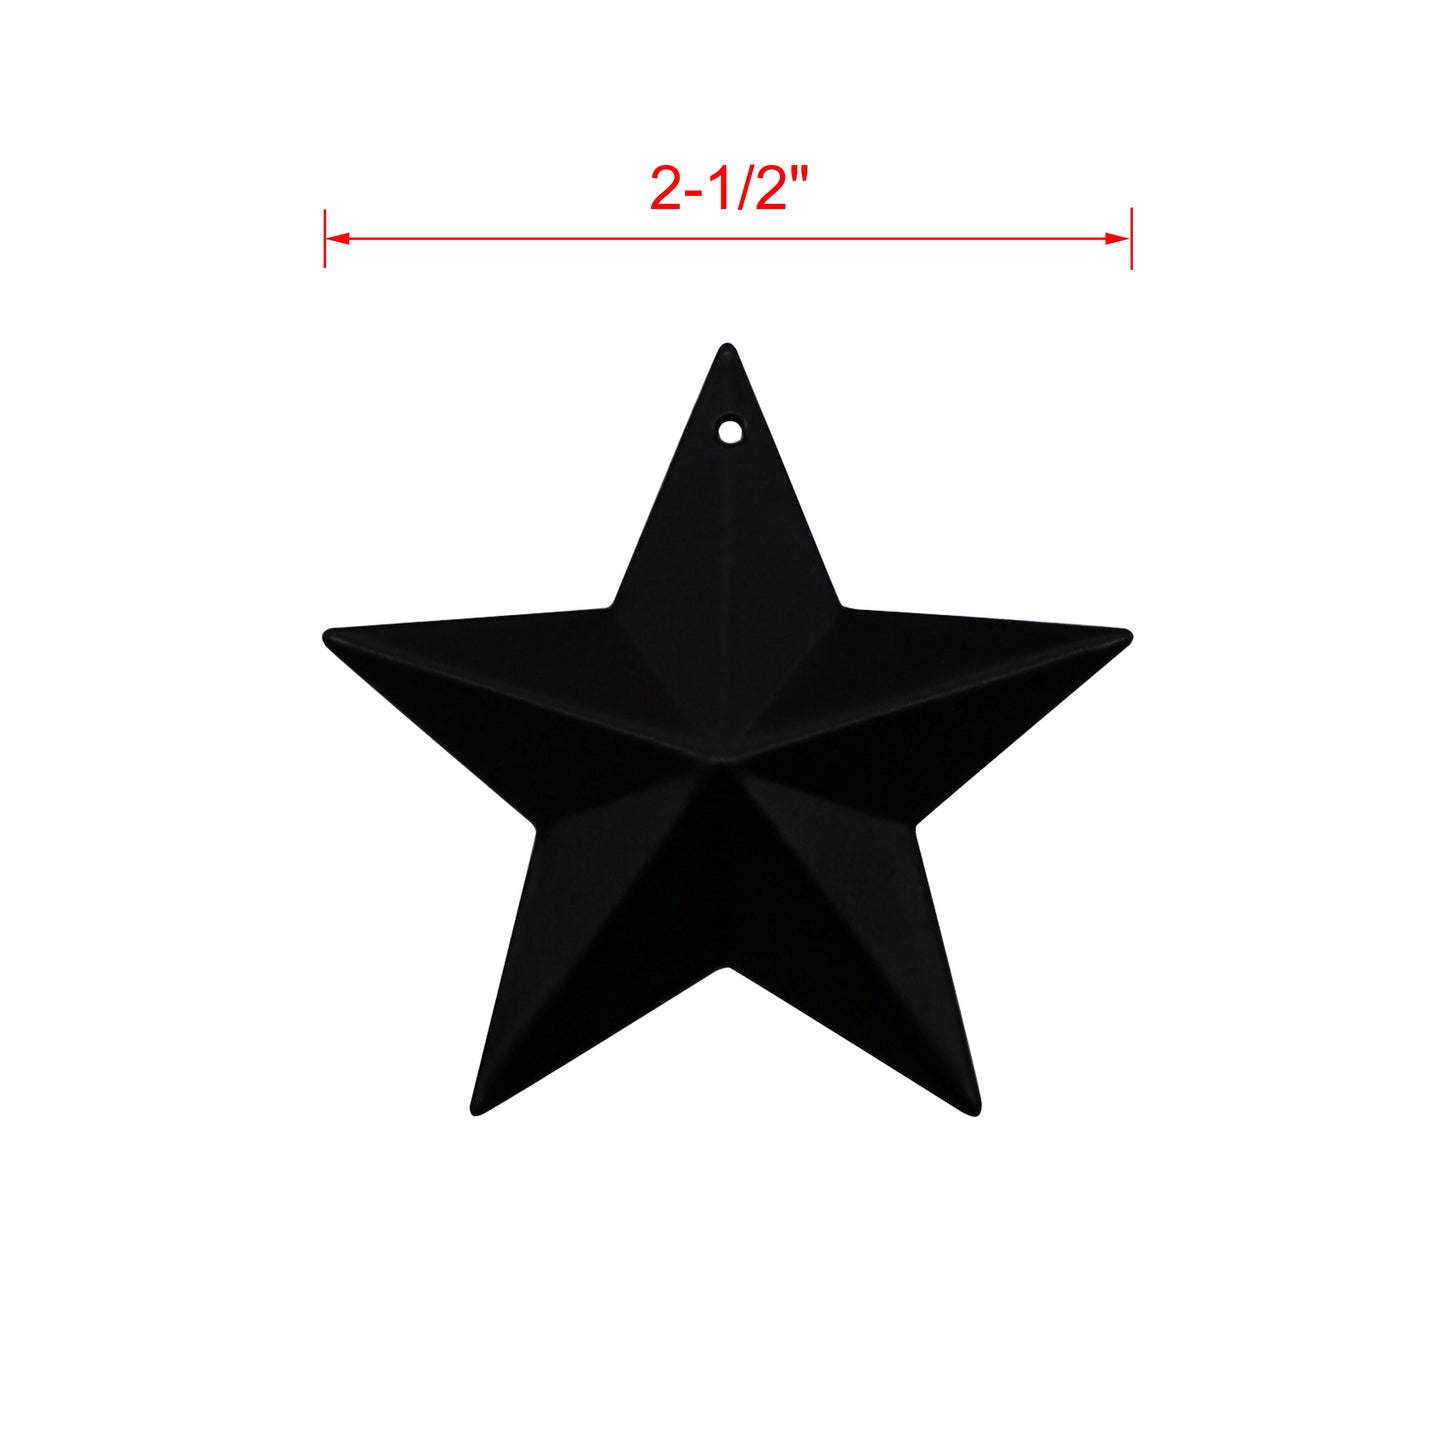 CVHOMEDECO. Country Rustic Primitive Vintage Gifts Black Small Metal Barn Star Wall/Door Decor, 2.5 Inch, Set of 12.